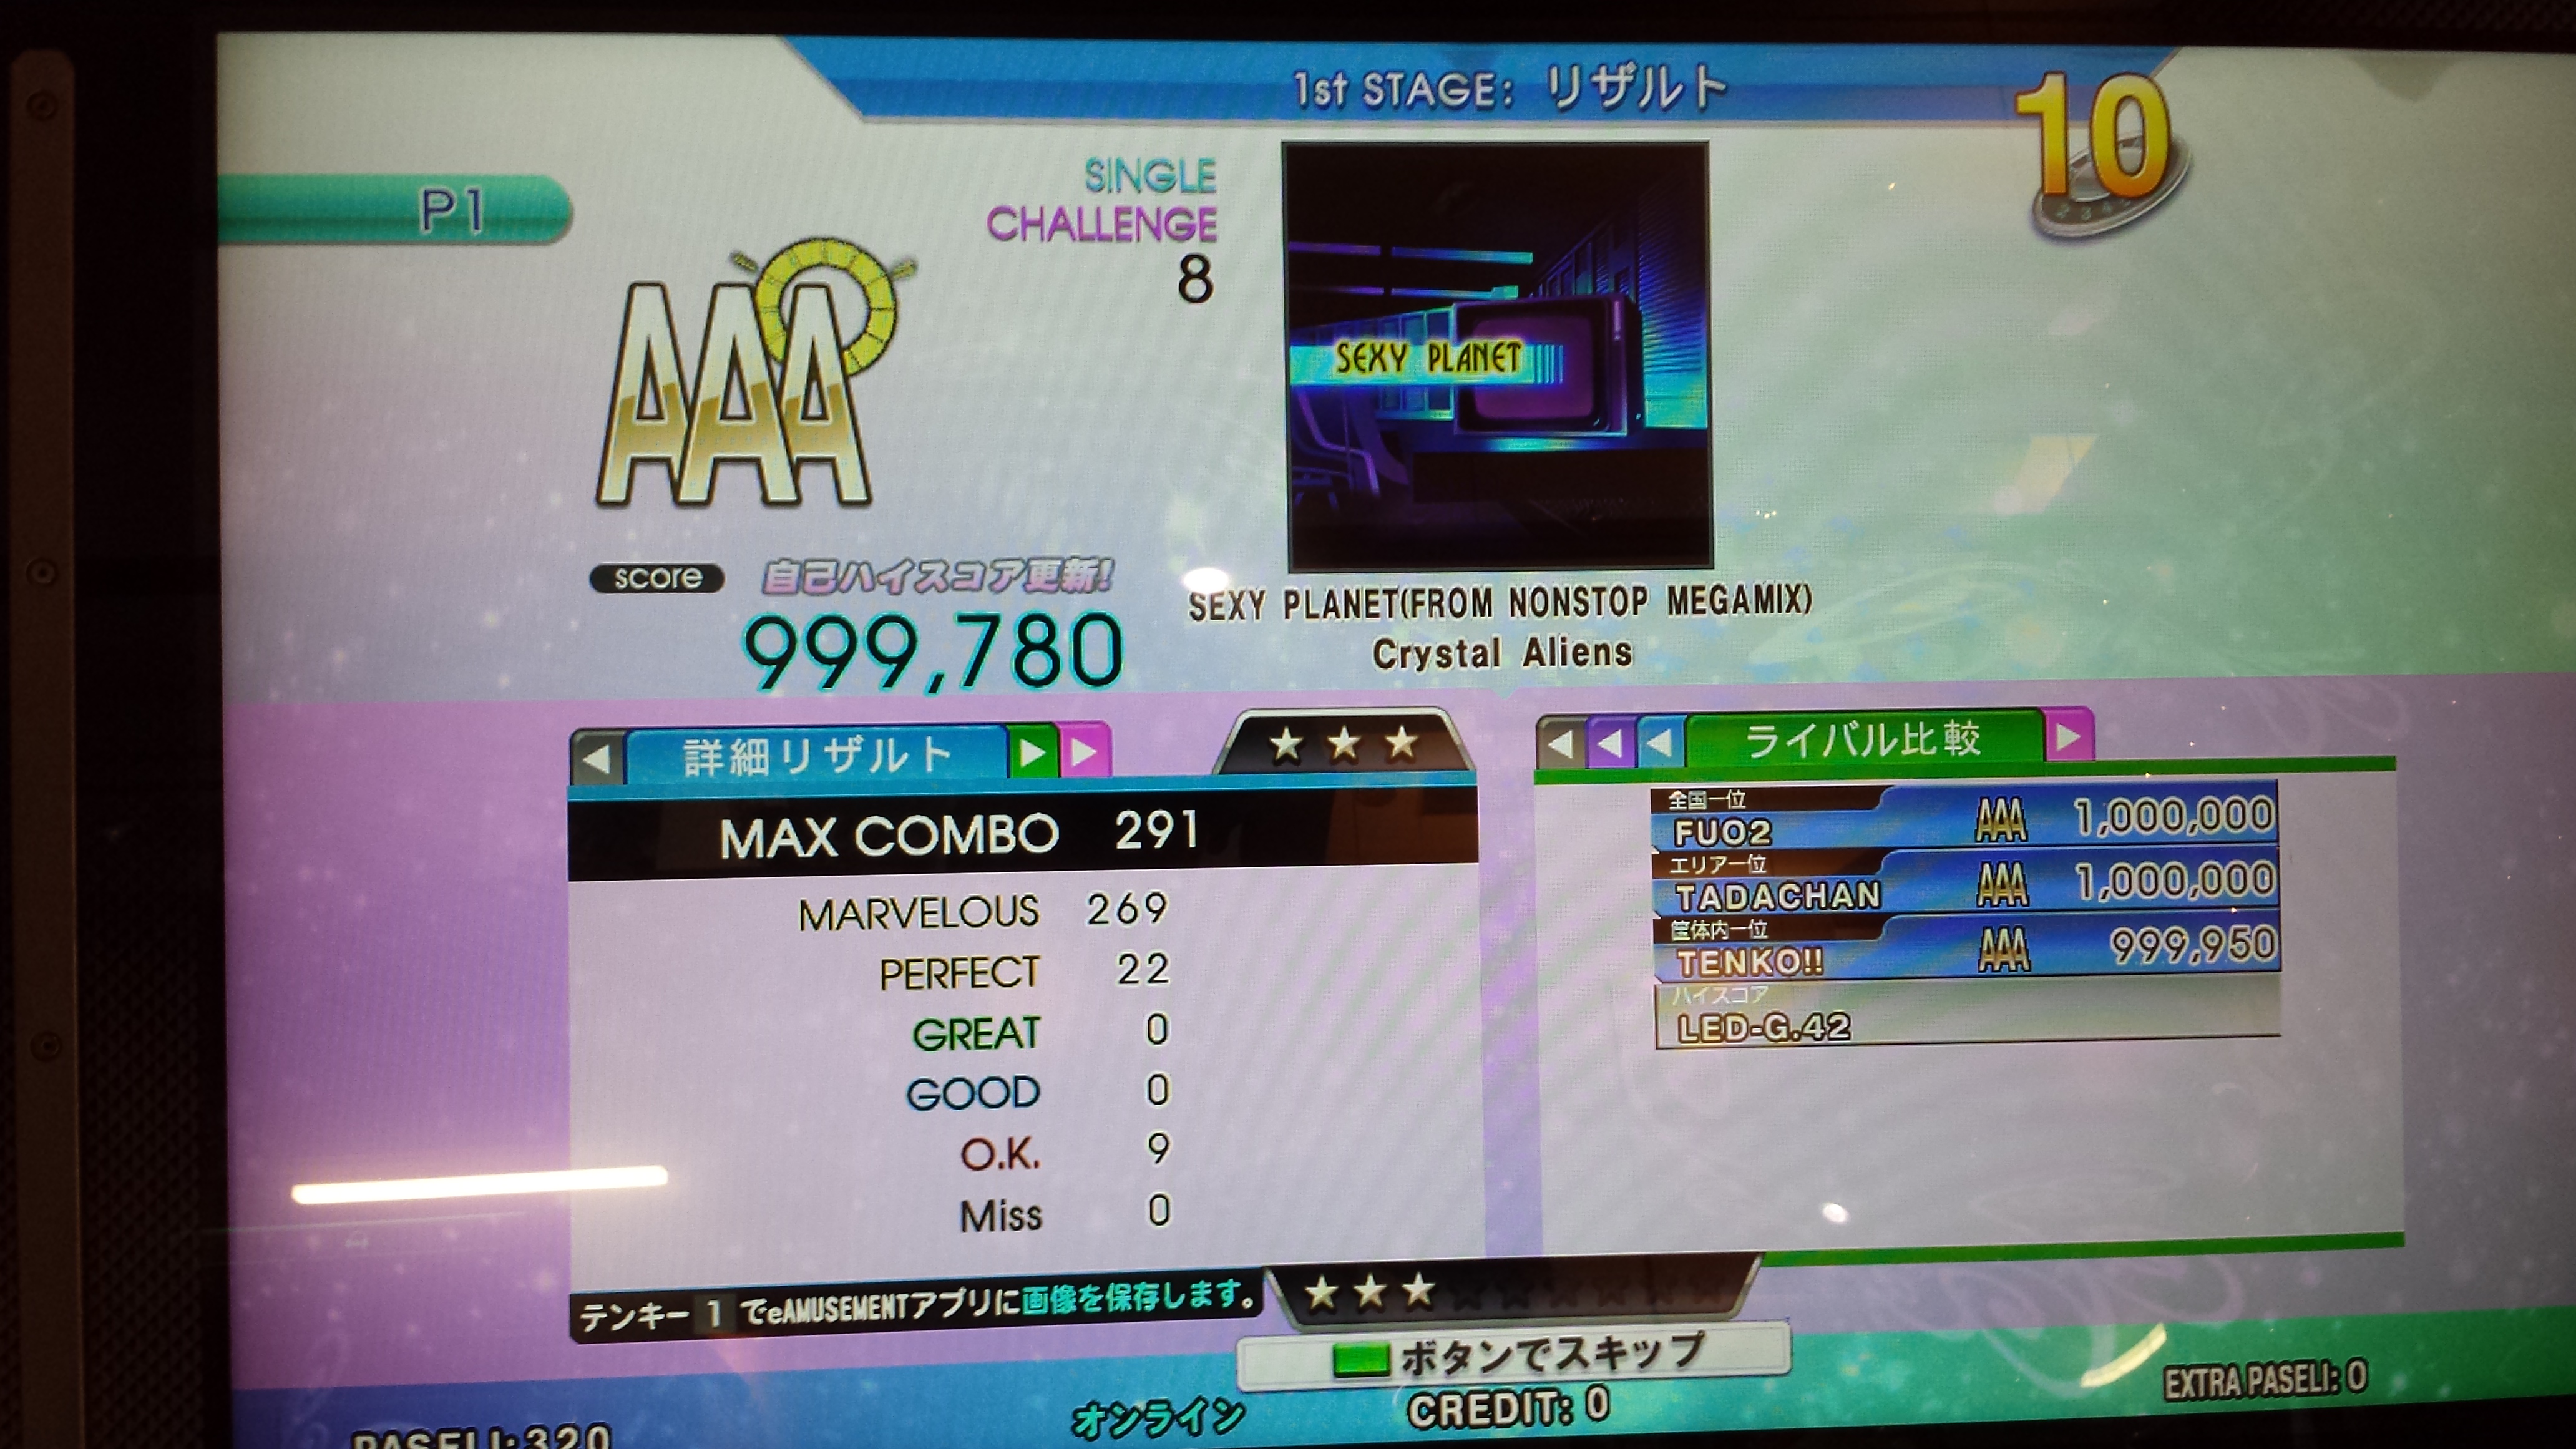 SEXY PLANET (FROM NONSTOP MEGAMIX) CSP 22p DDR 2014 AC